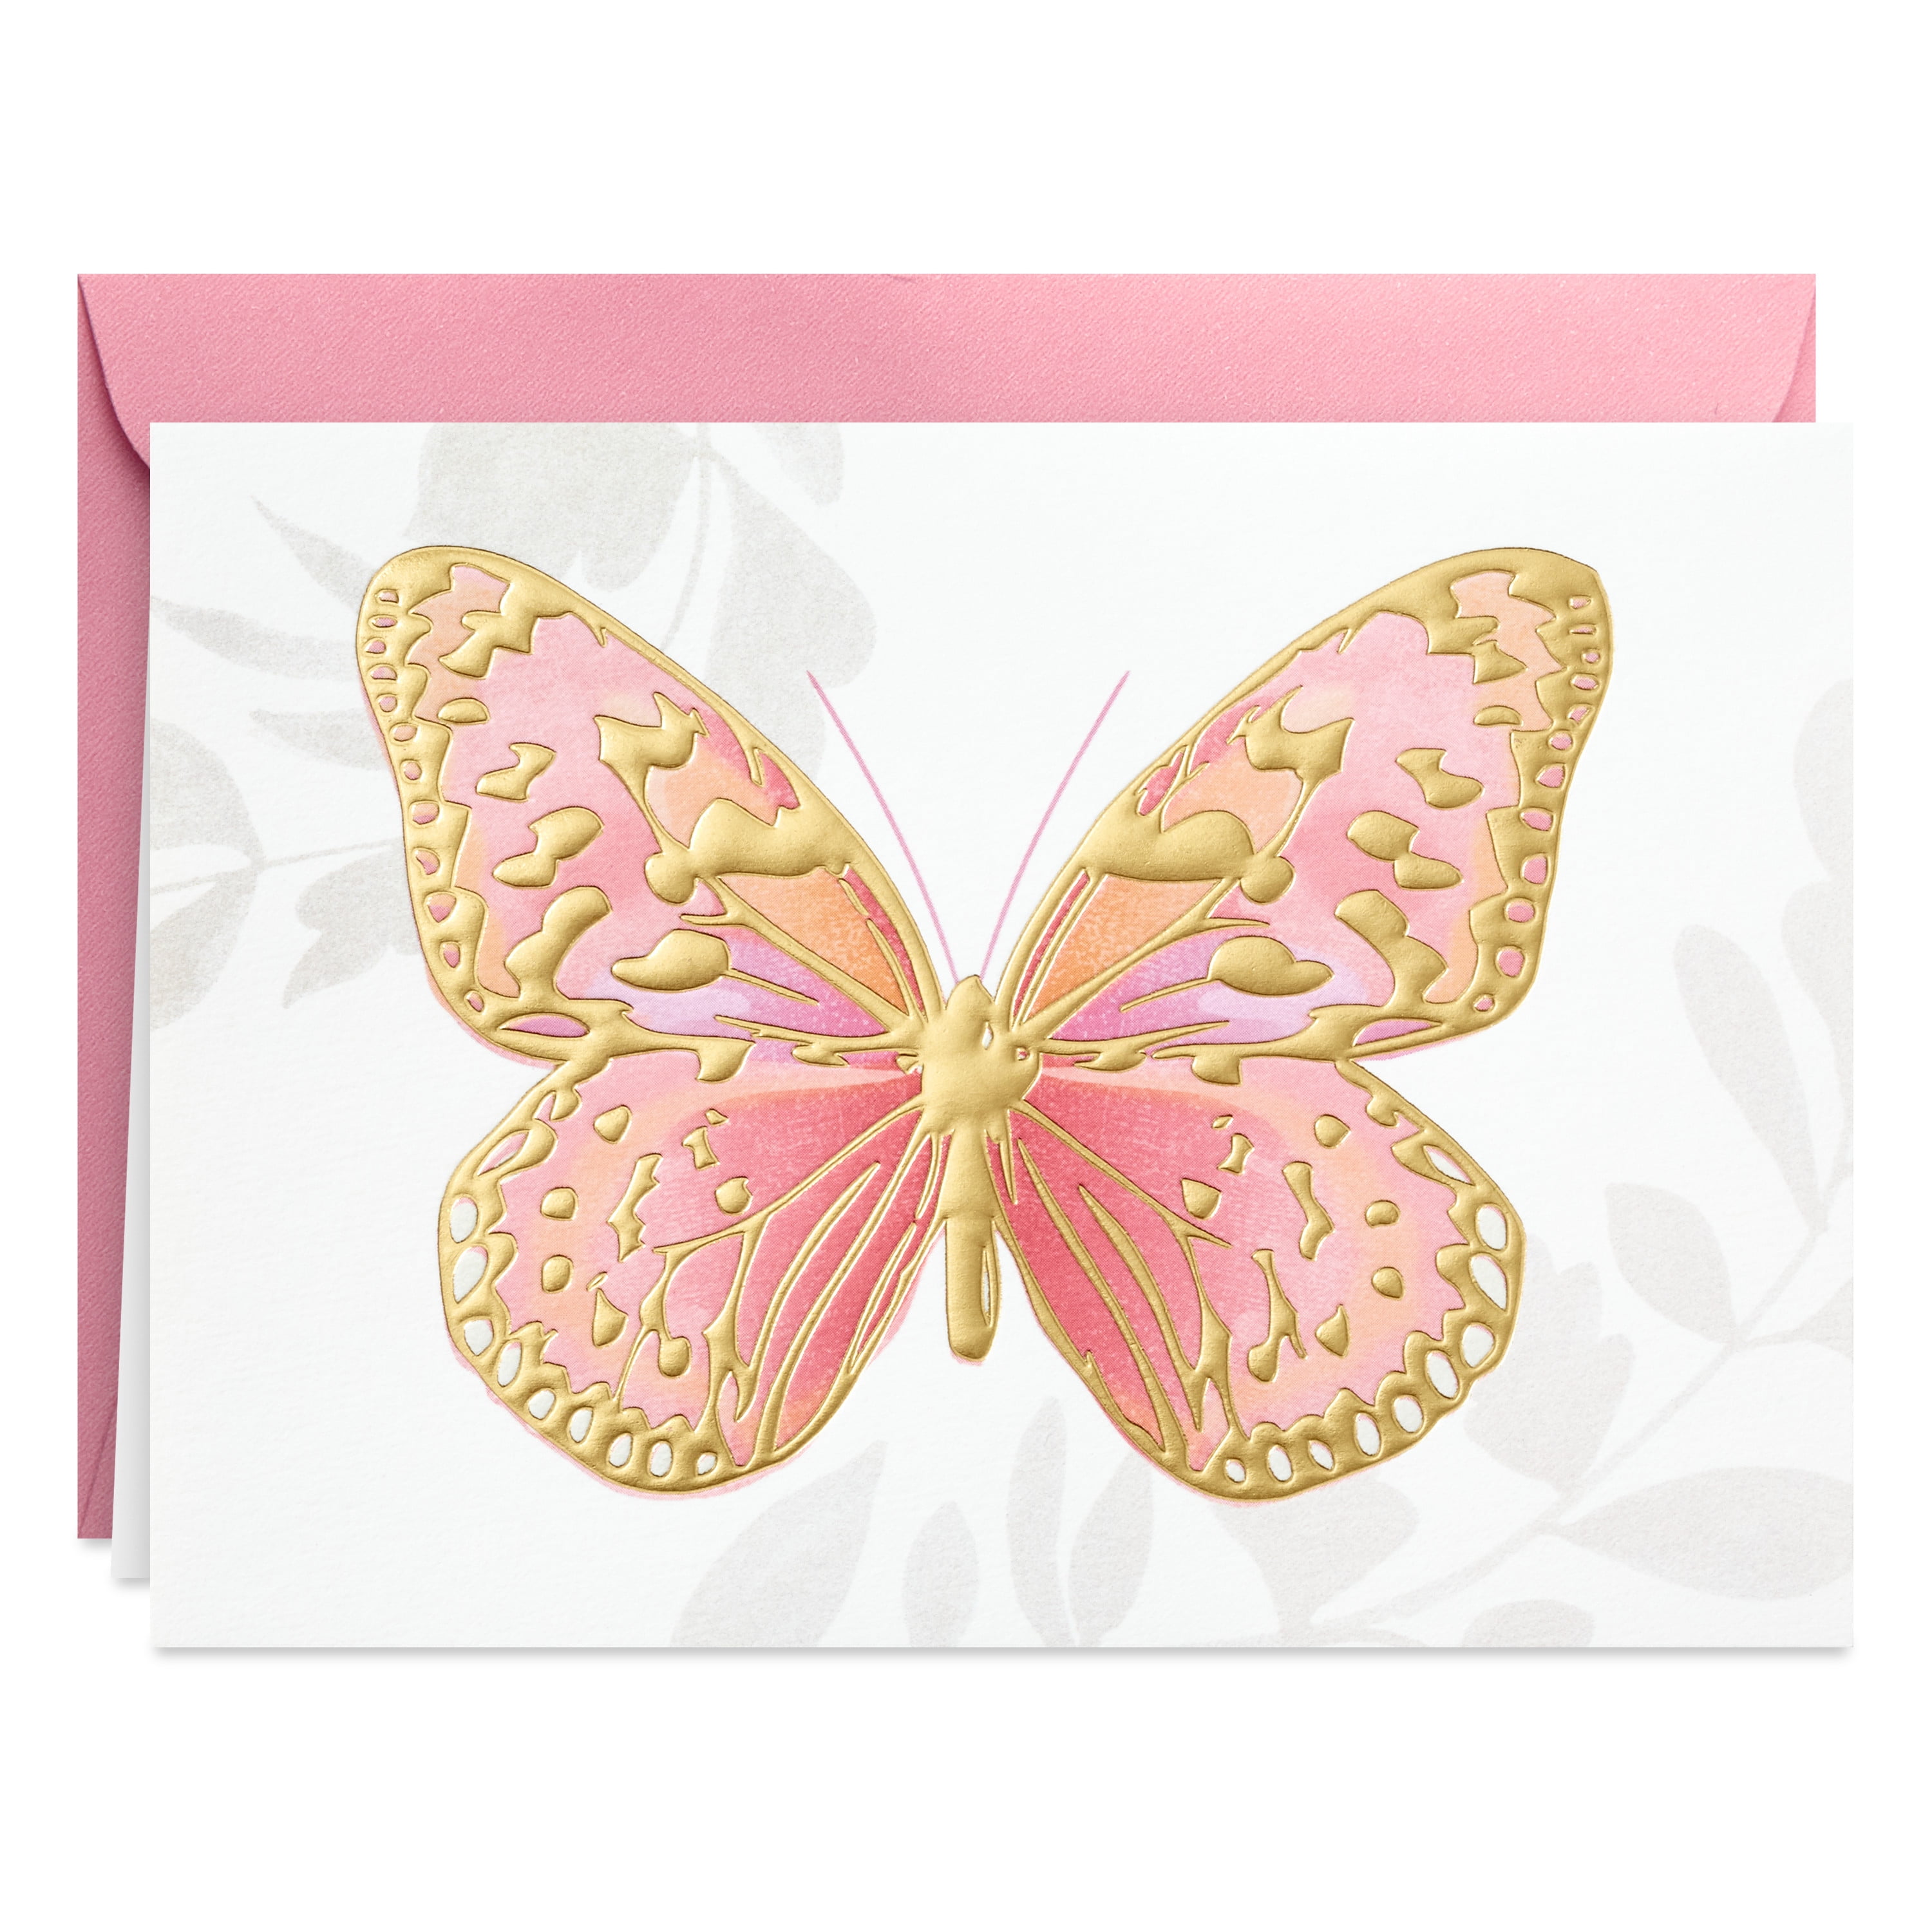 Hallmark Blank Note Cards, Watercolor Butterfly, 24 ct.